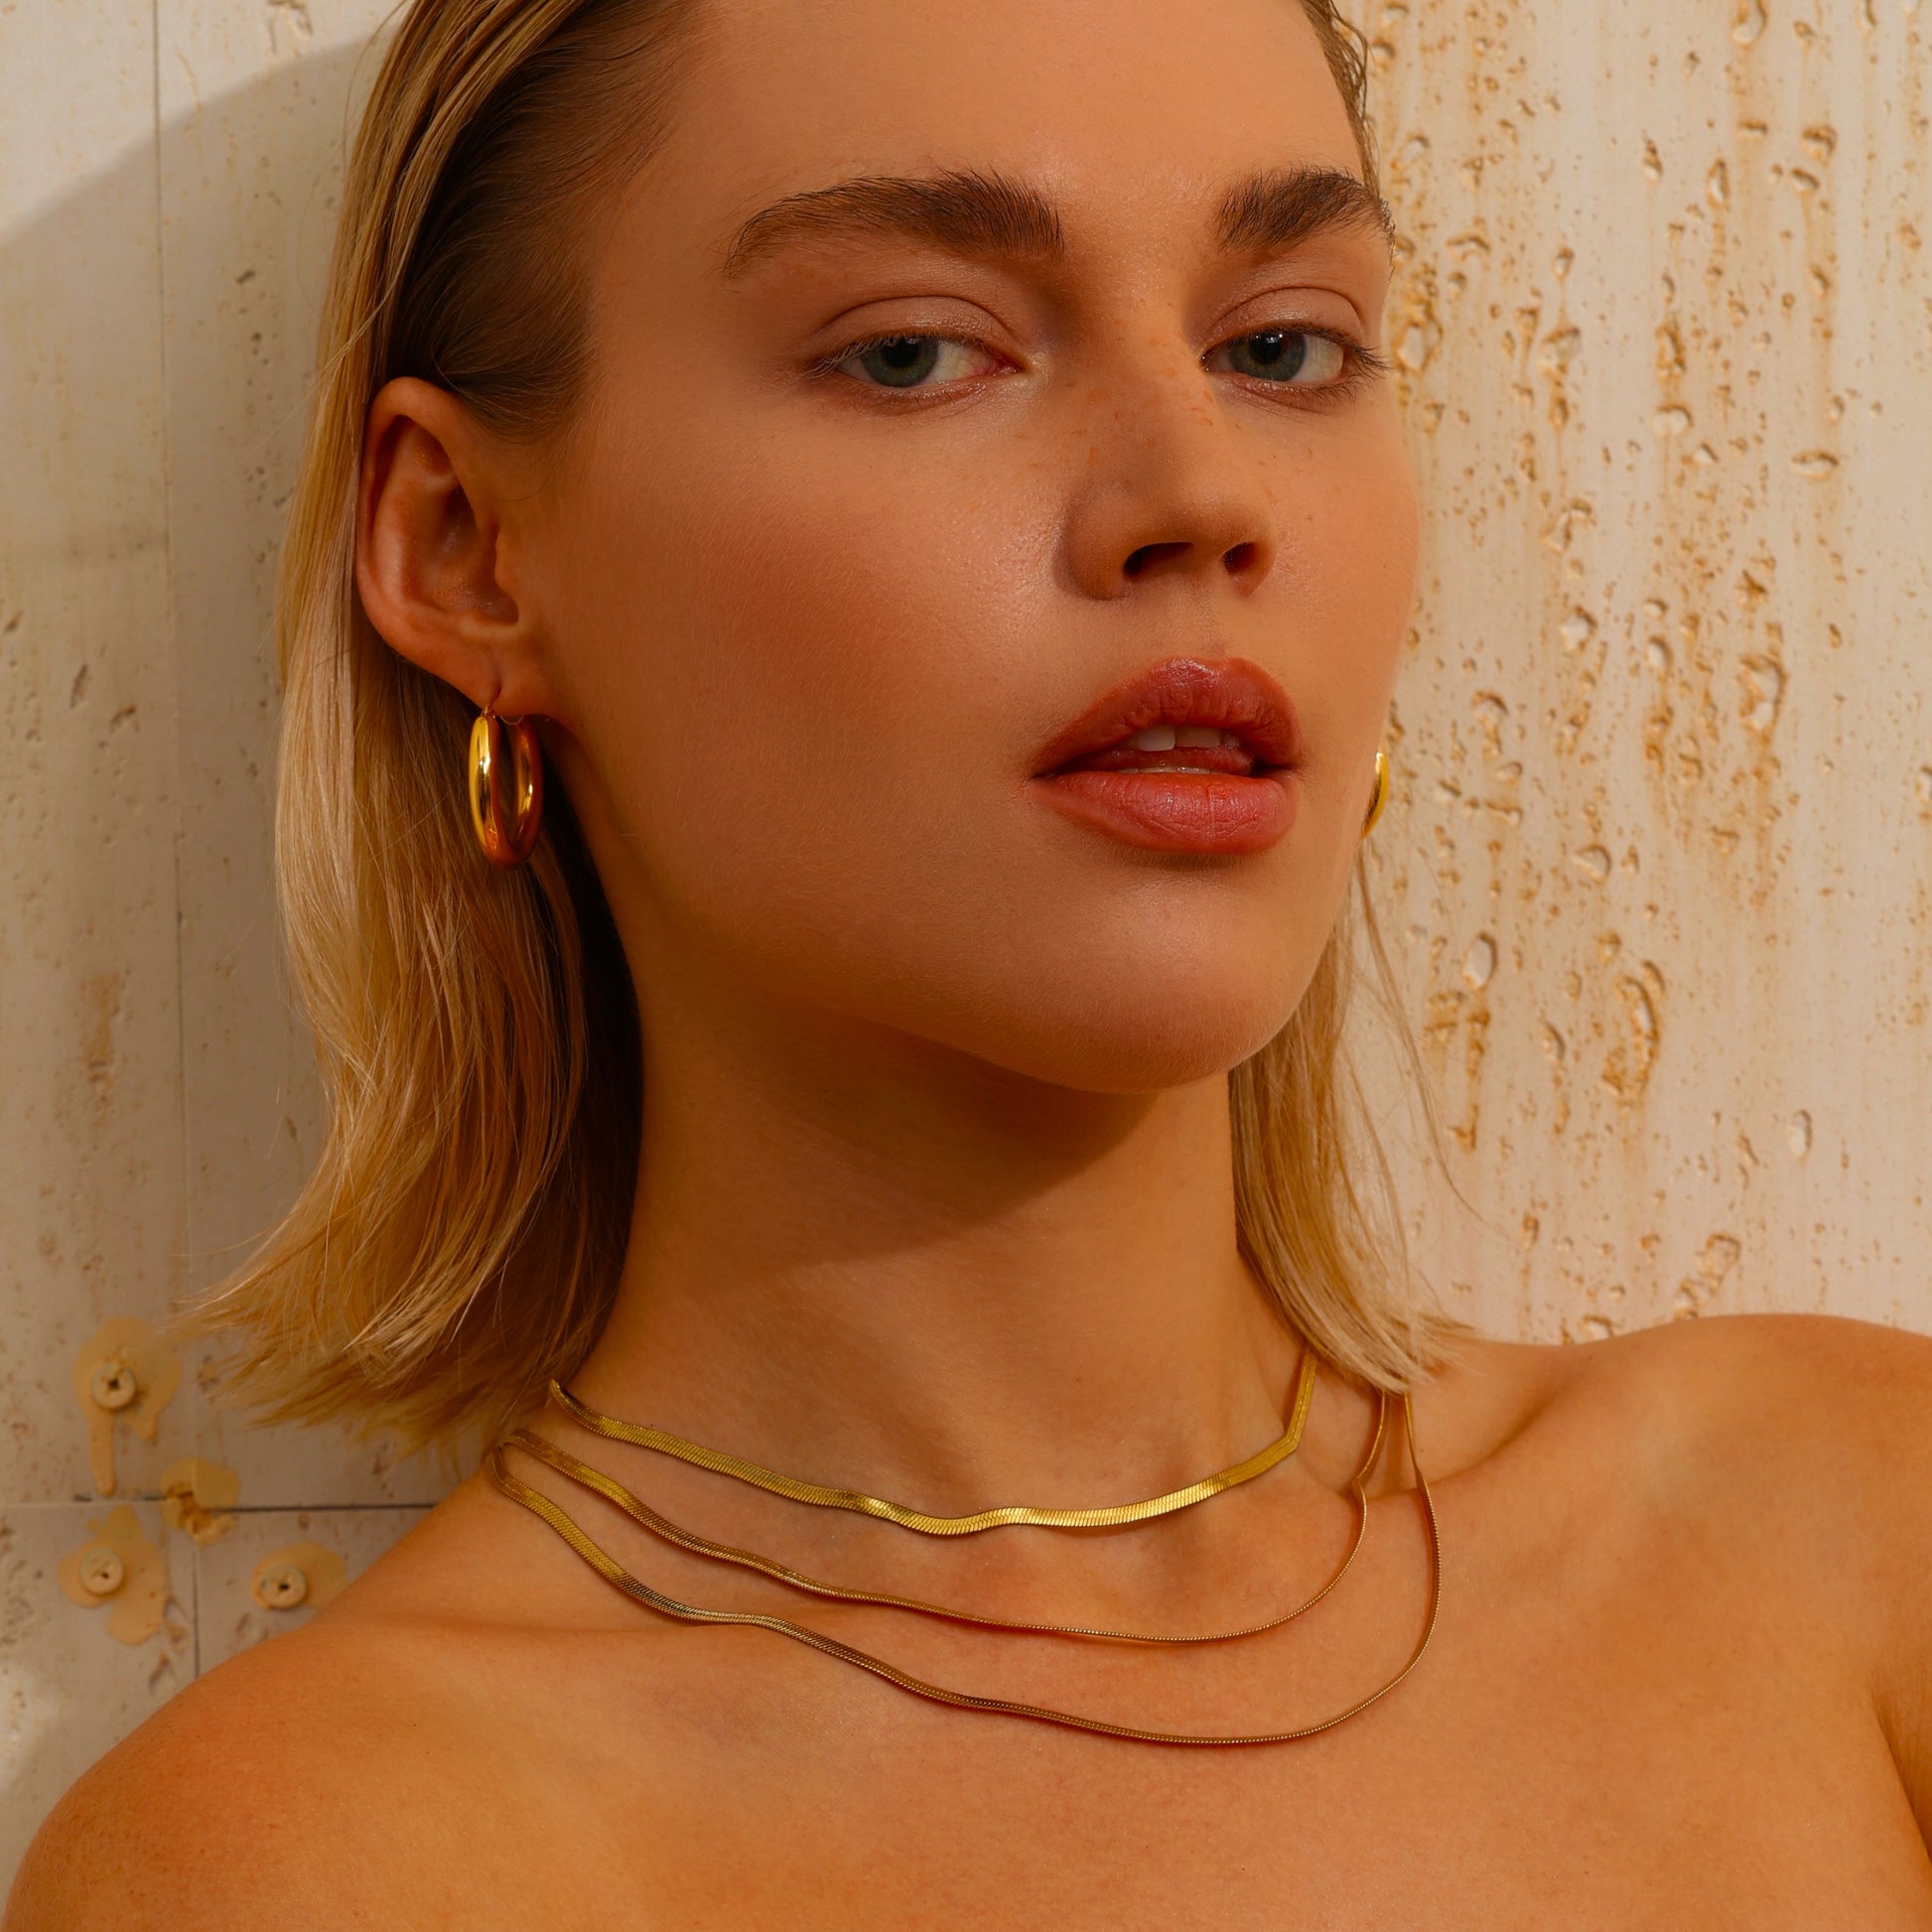 3 Layer Snake Chain Necklace - 18K Gold Plated - Hypoallergenic - Necklace - ONNNIII